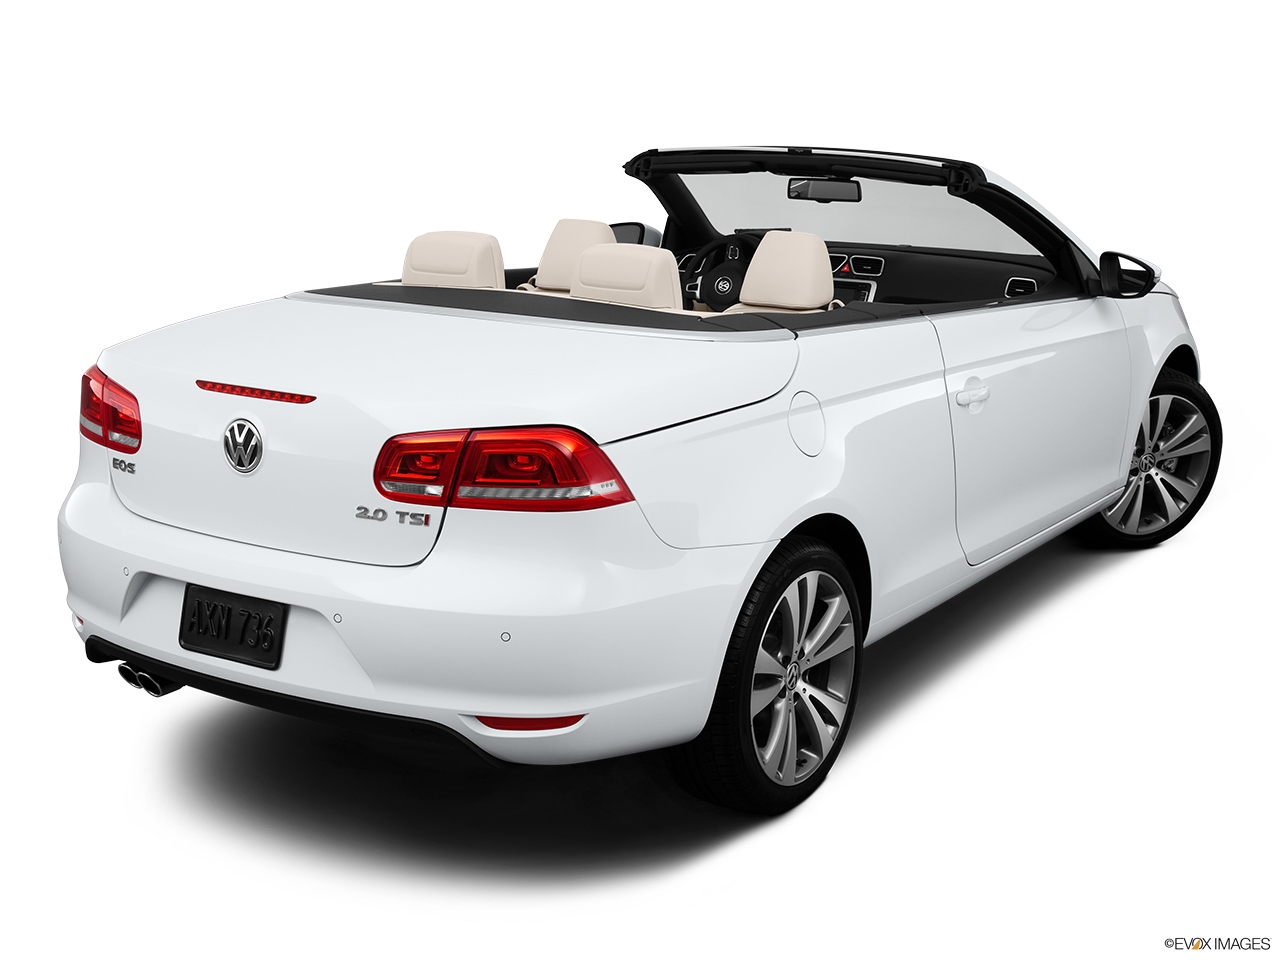 2013 Volkswagen Eos Lux Rear 3/4 angle view. 